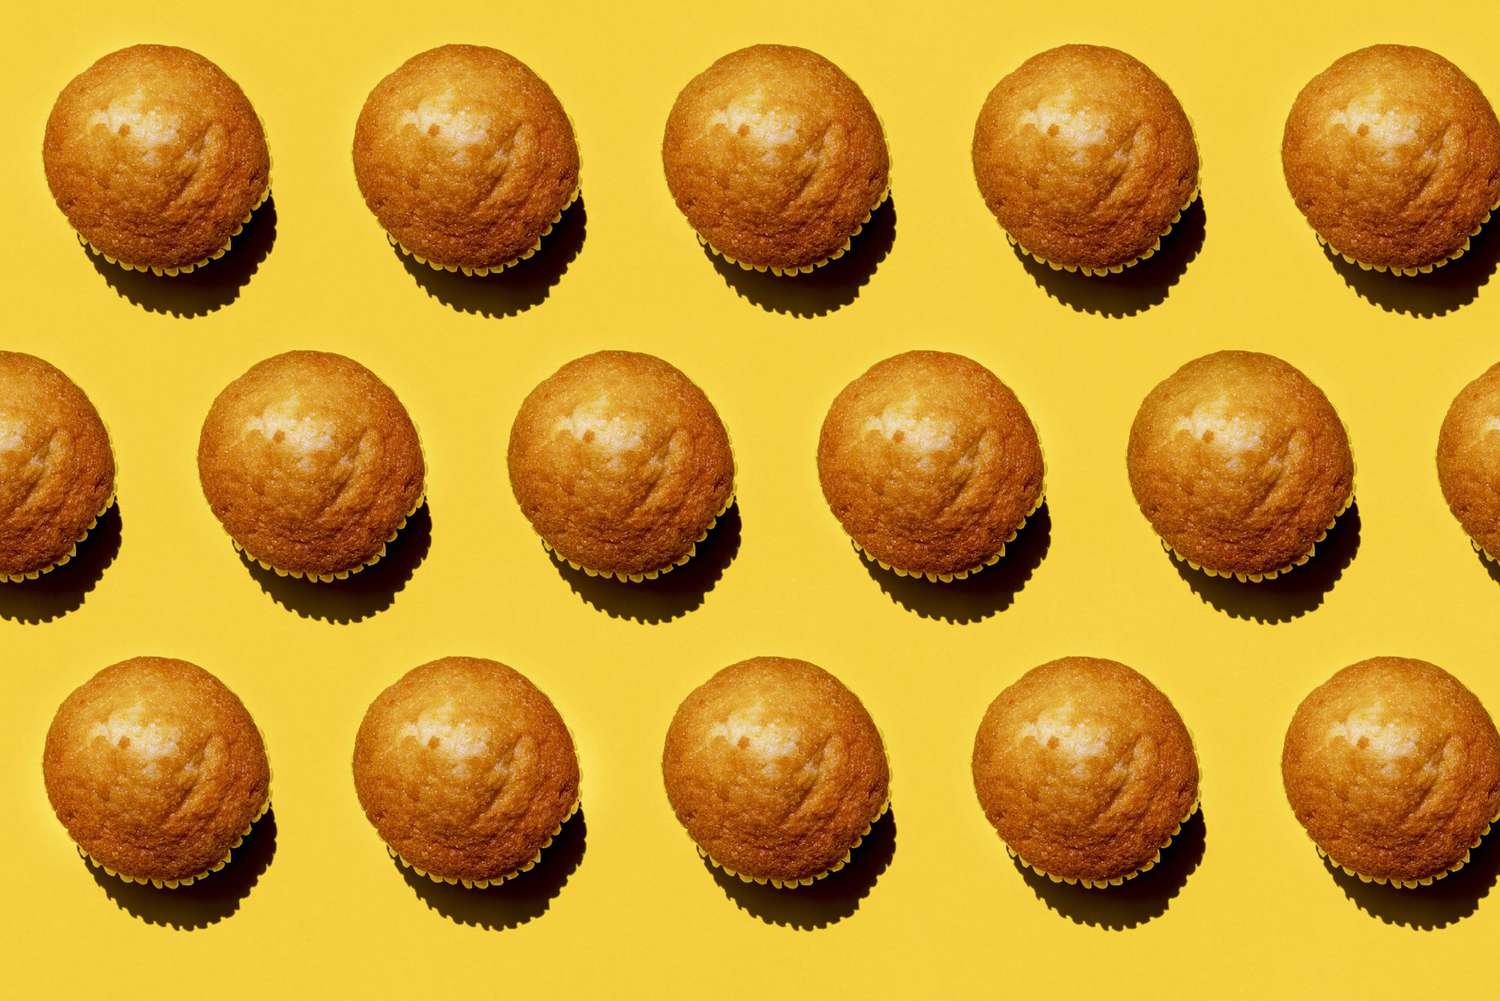 Pattern of rows of muffins against yellow background